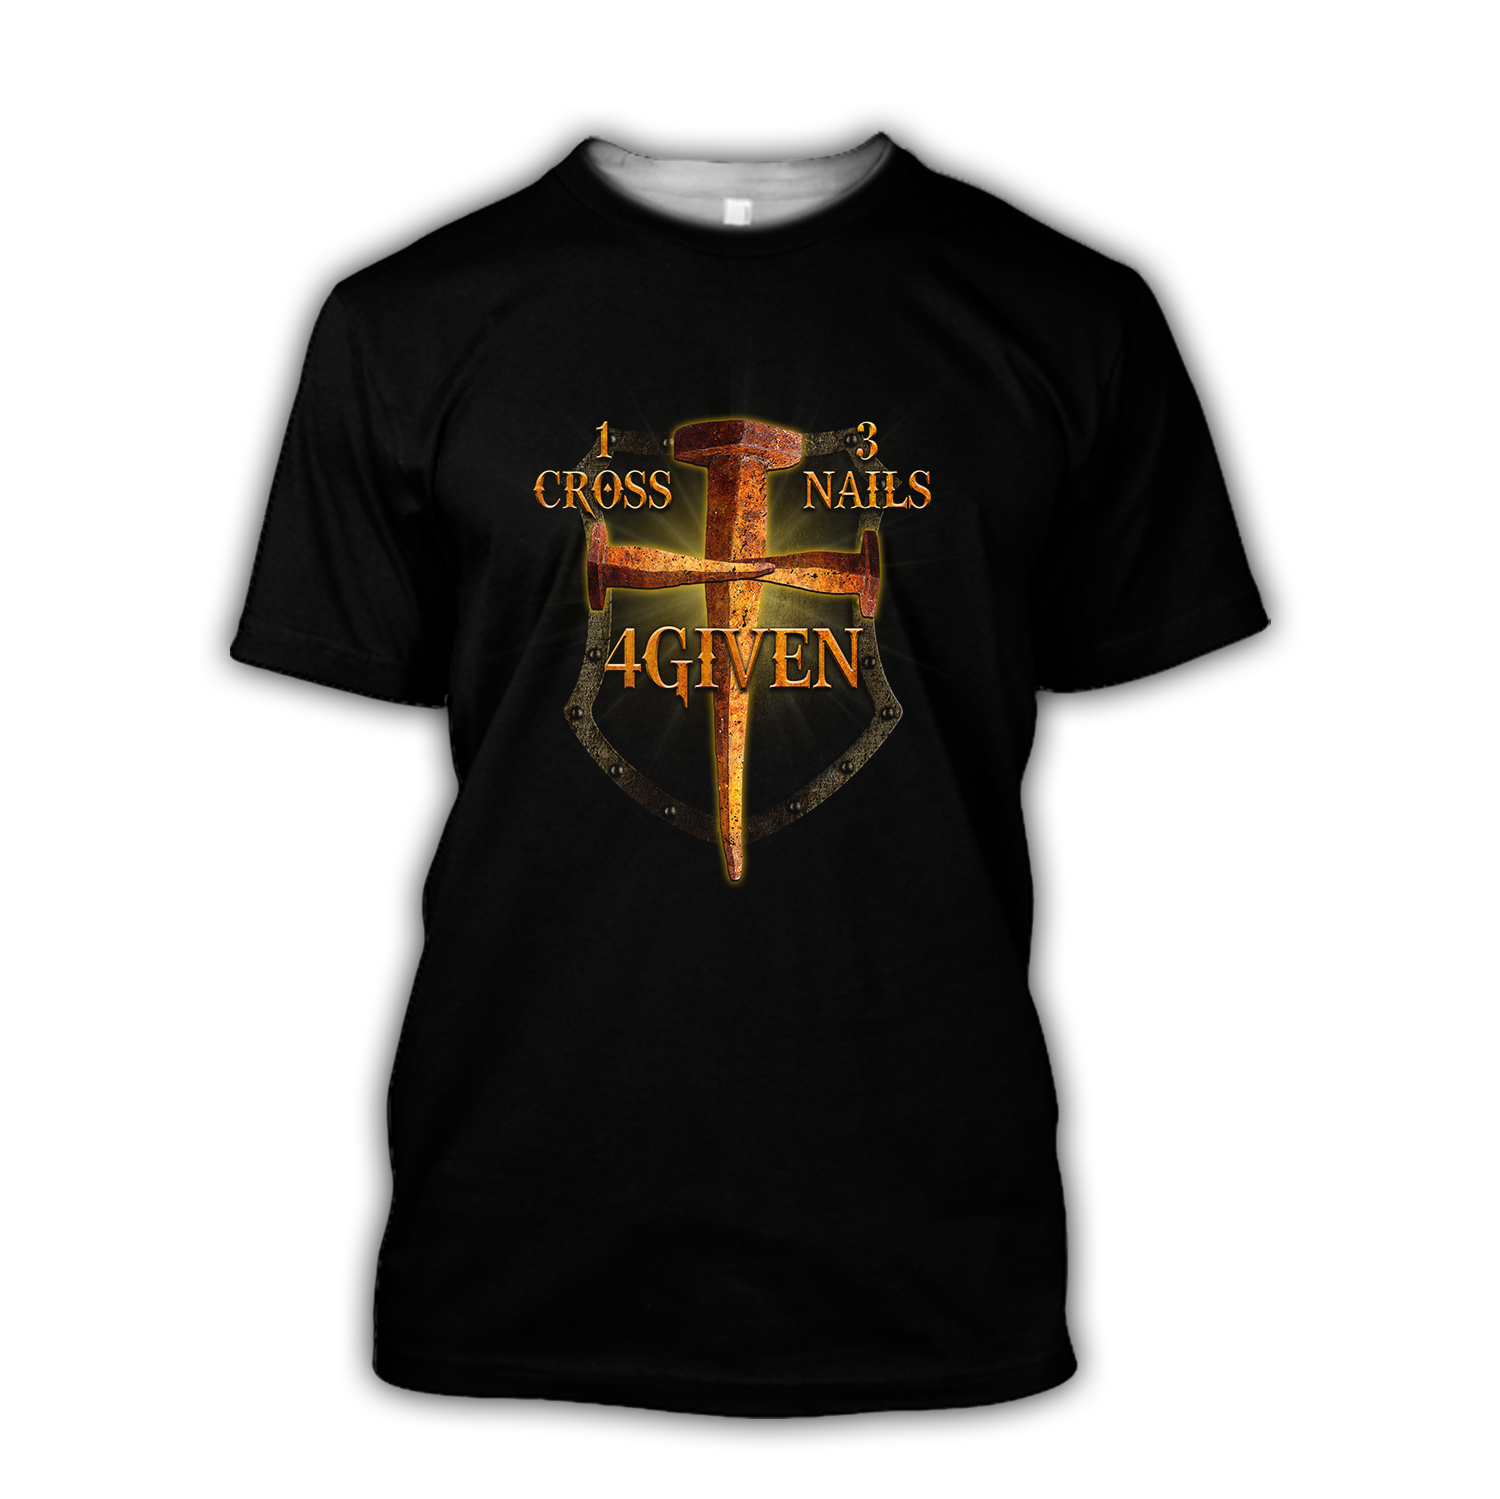 1Cross 3Nails 4Given - T-Shirt Style for Men and Women